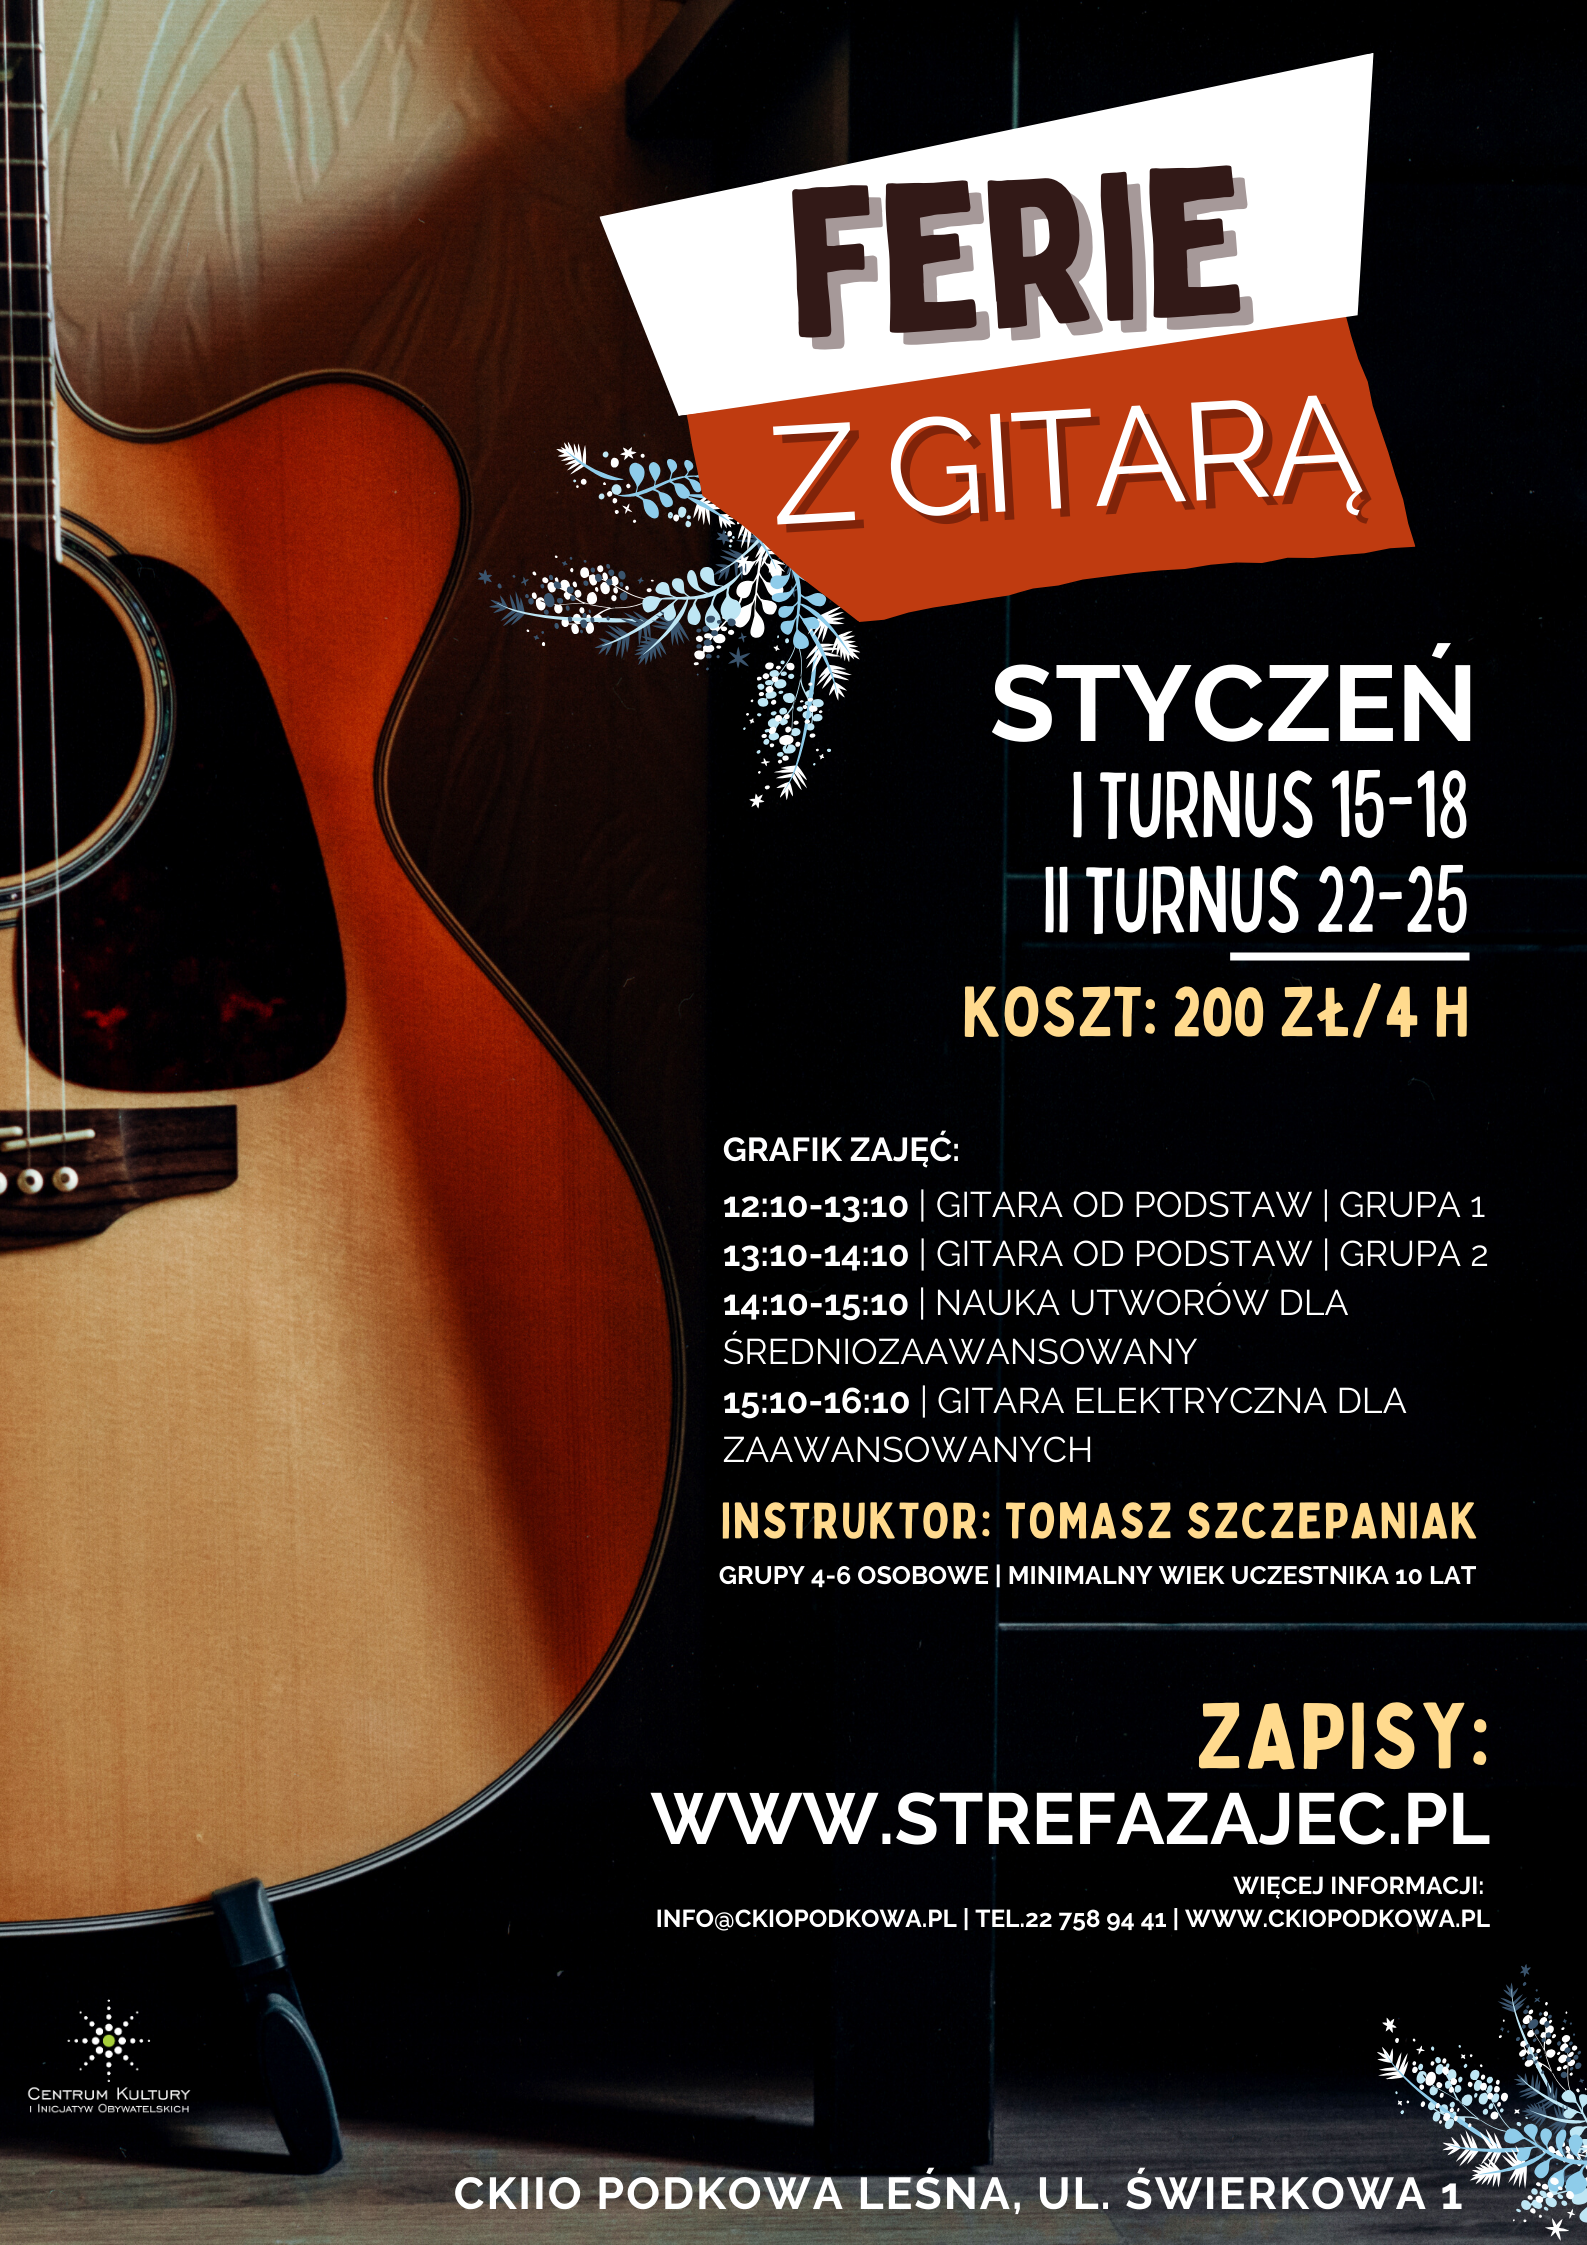 You are currently viewing Ferie z gitarą